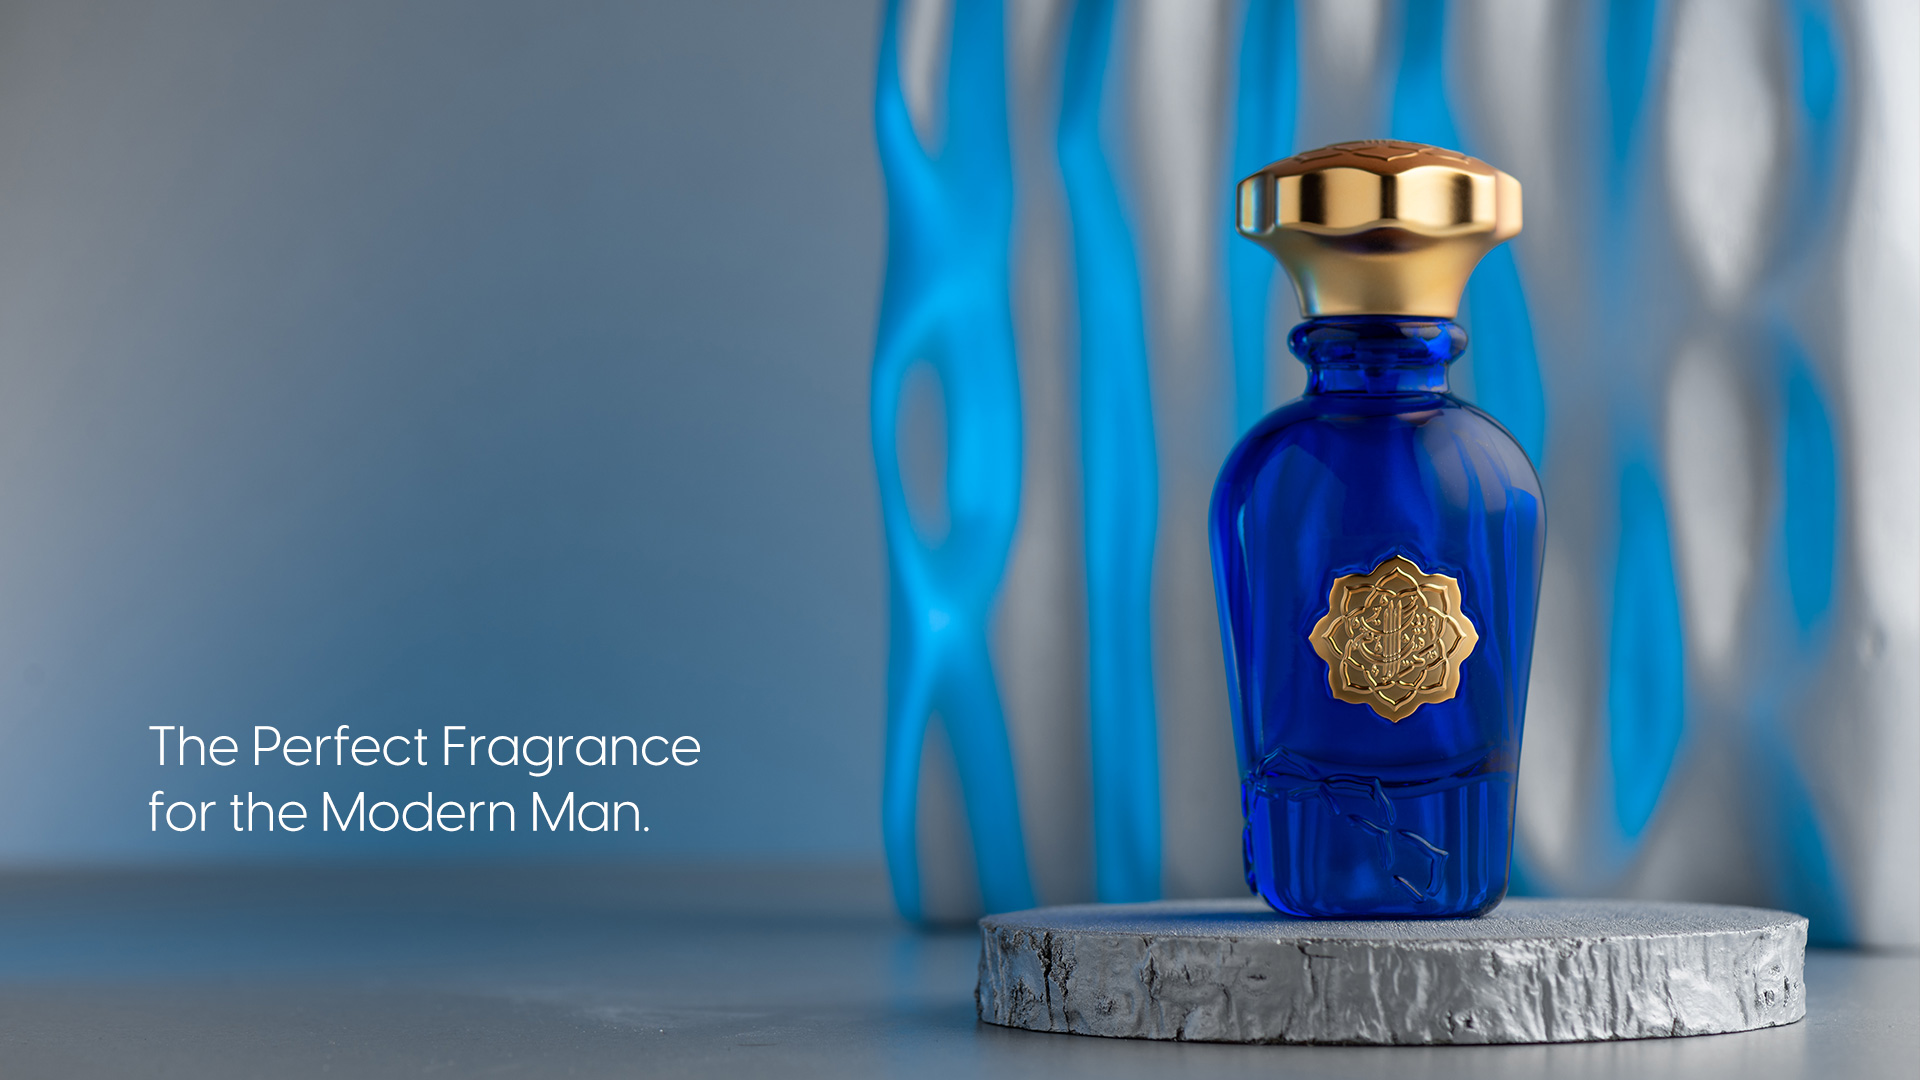 The Scent of Success The Perfect Fragrance for the Modern Man